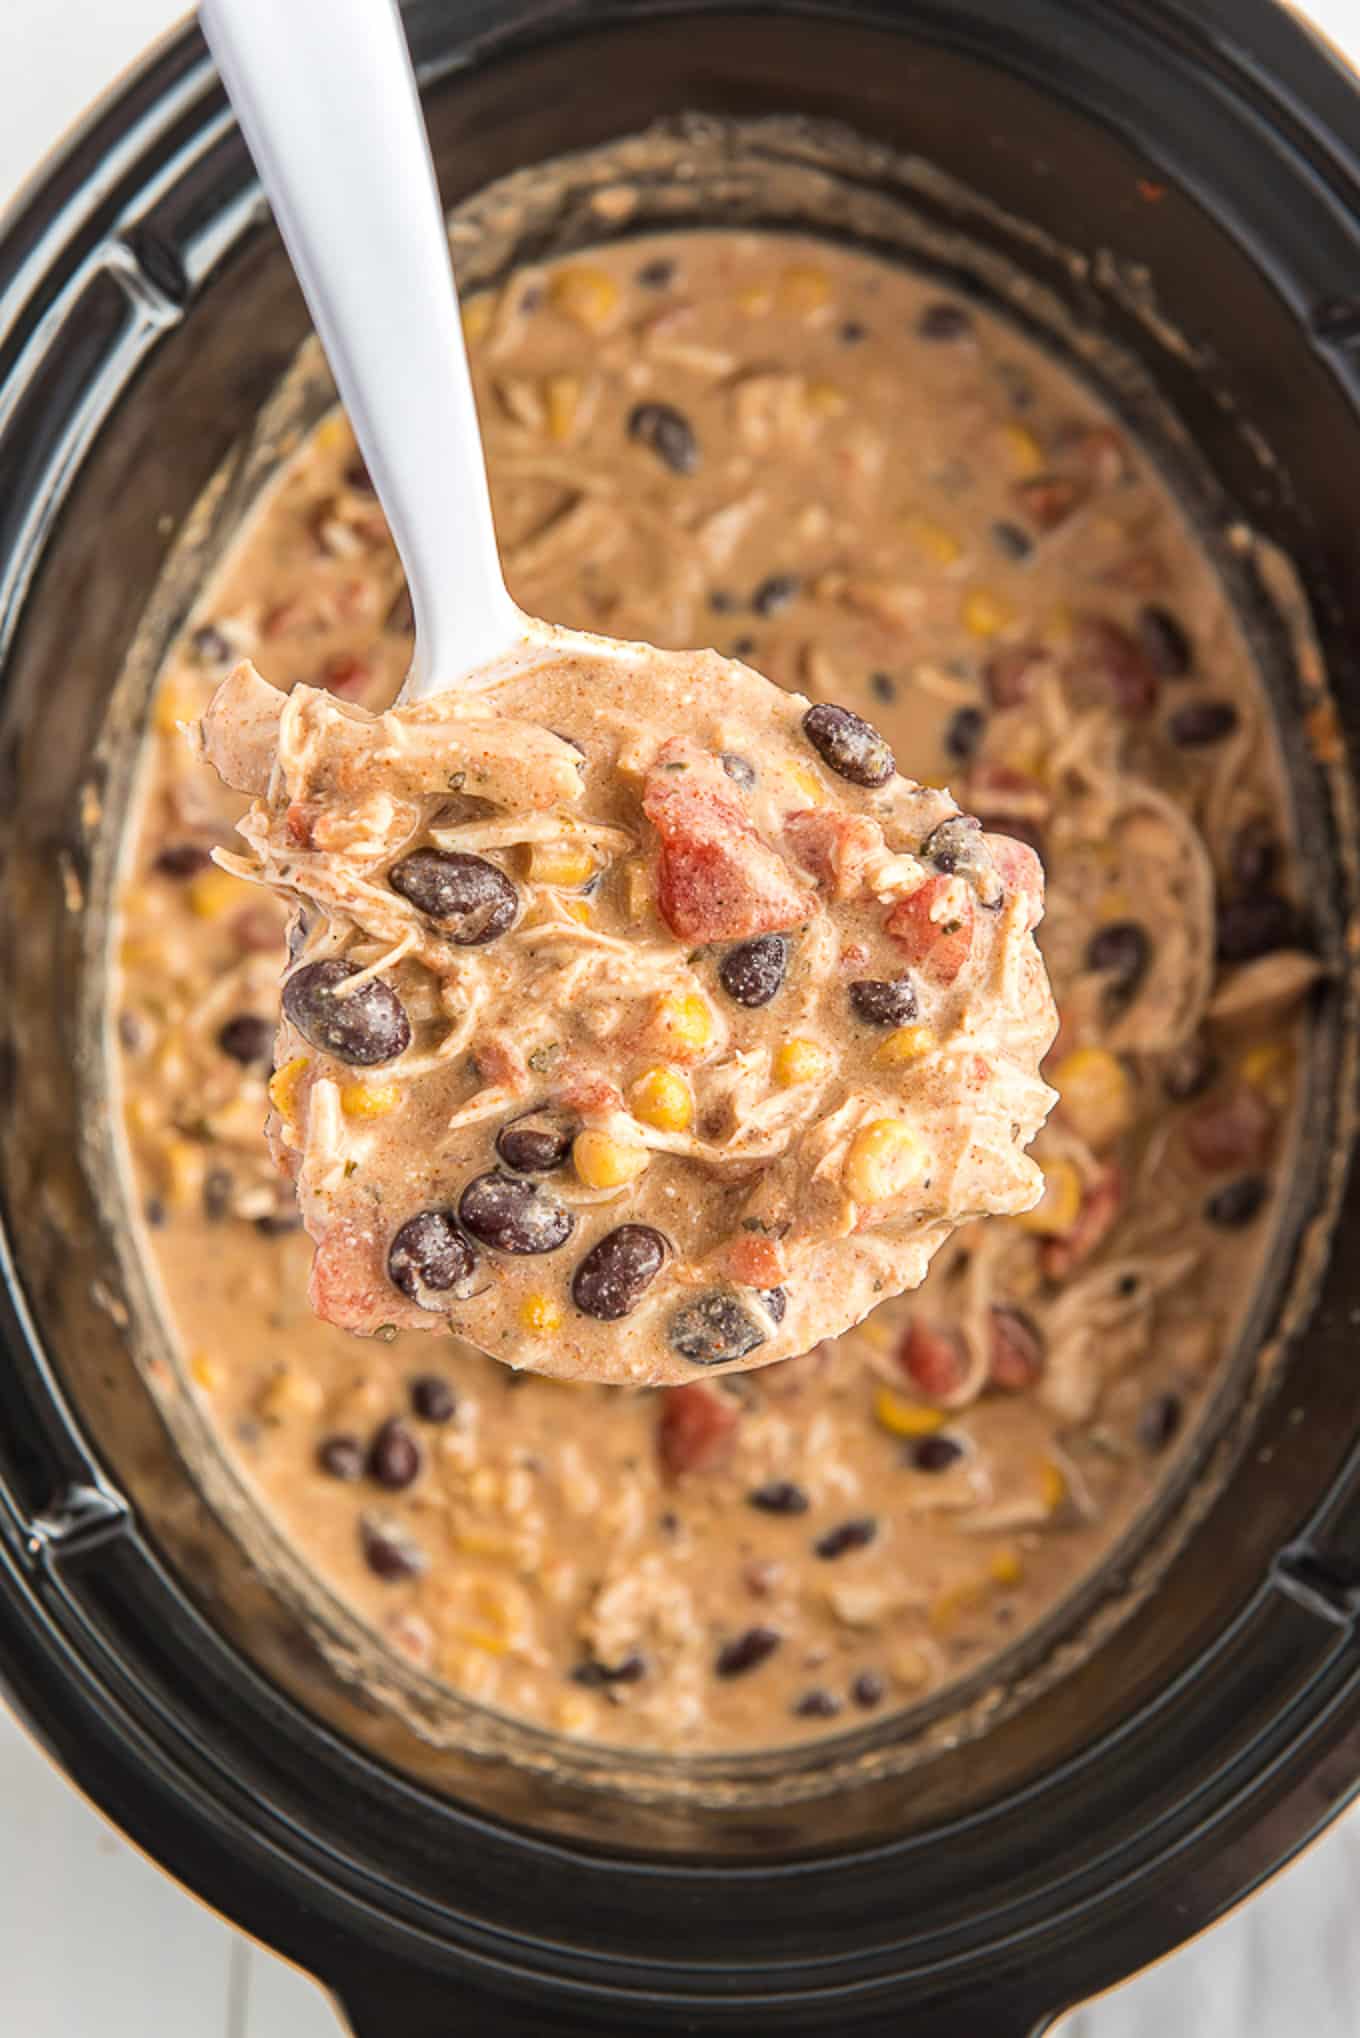 Crockpot white chicken chili in the slow cooker with a ladle lifting up a spoonful.